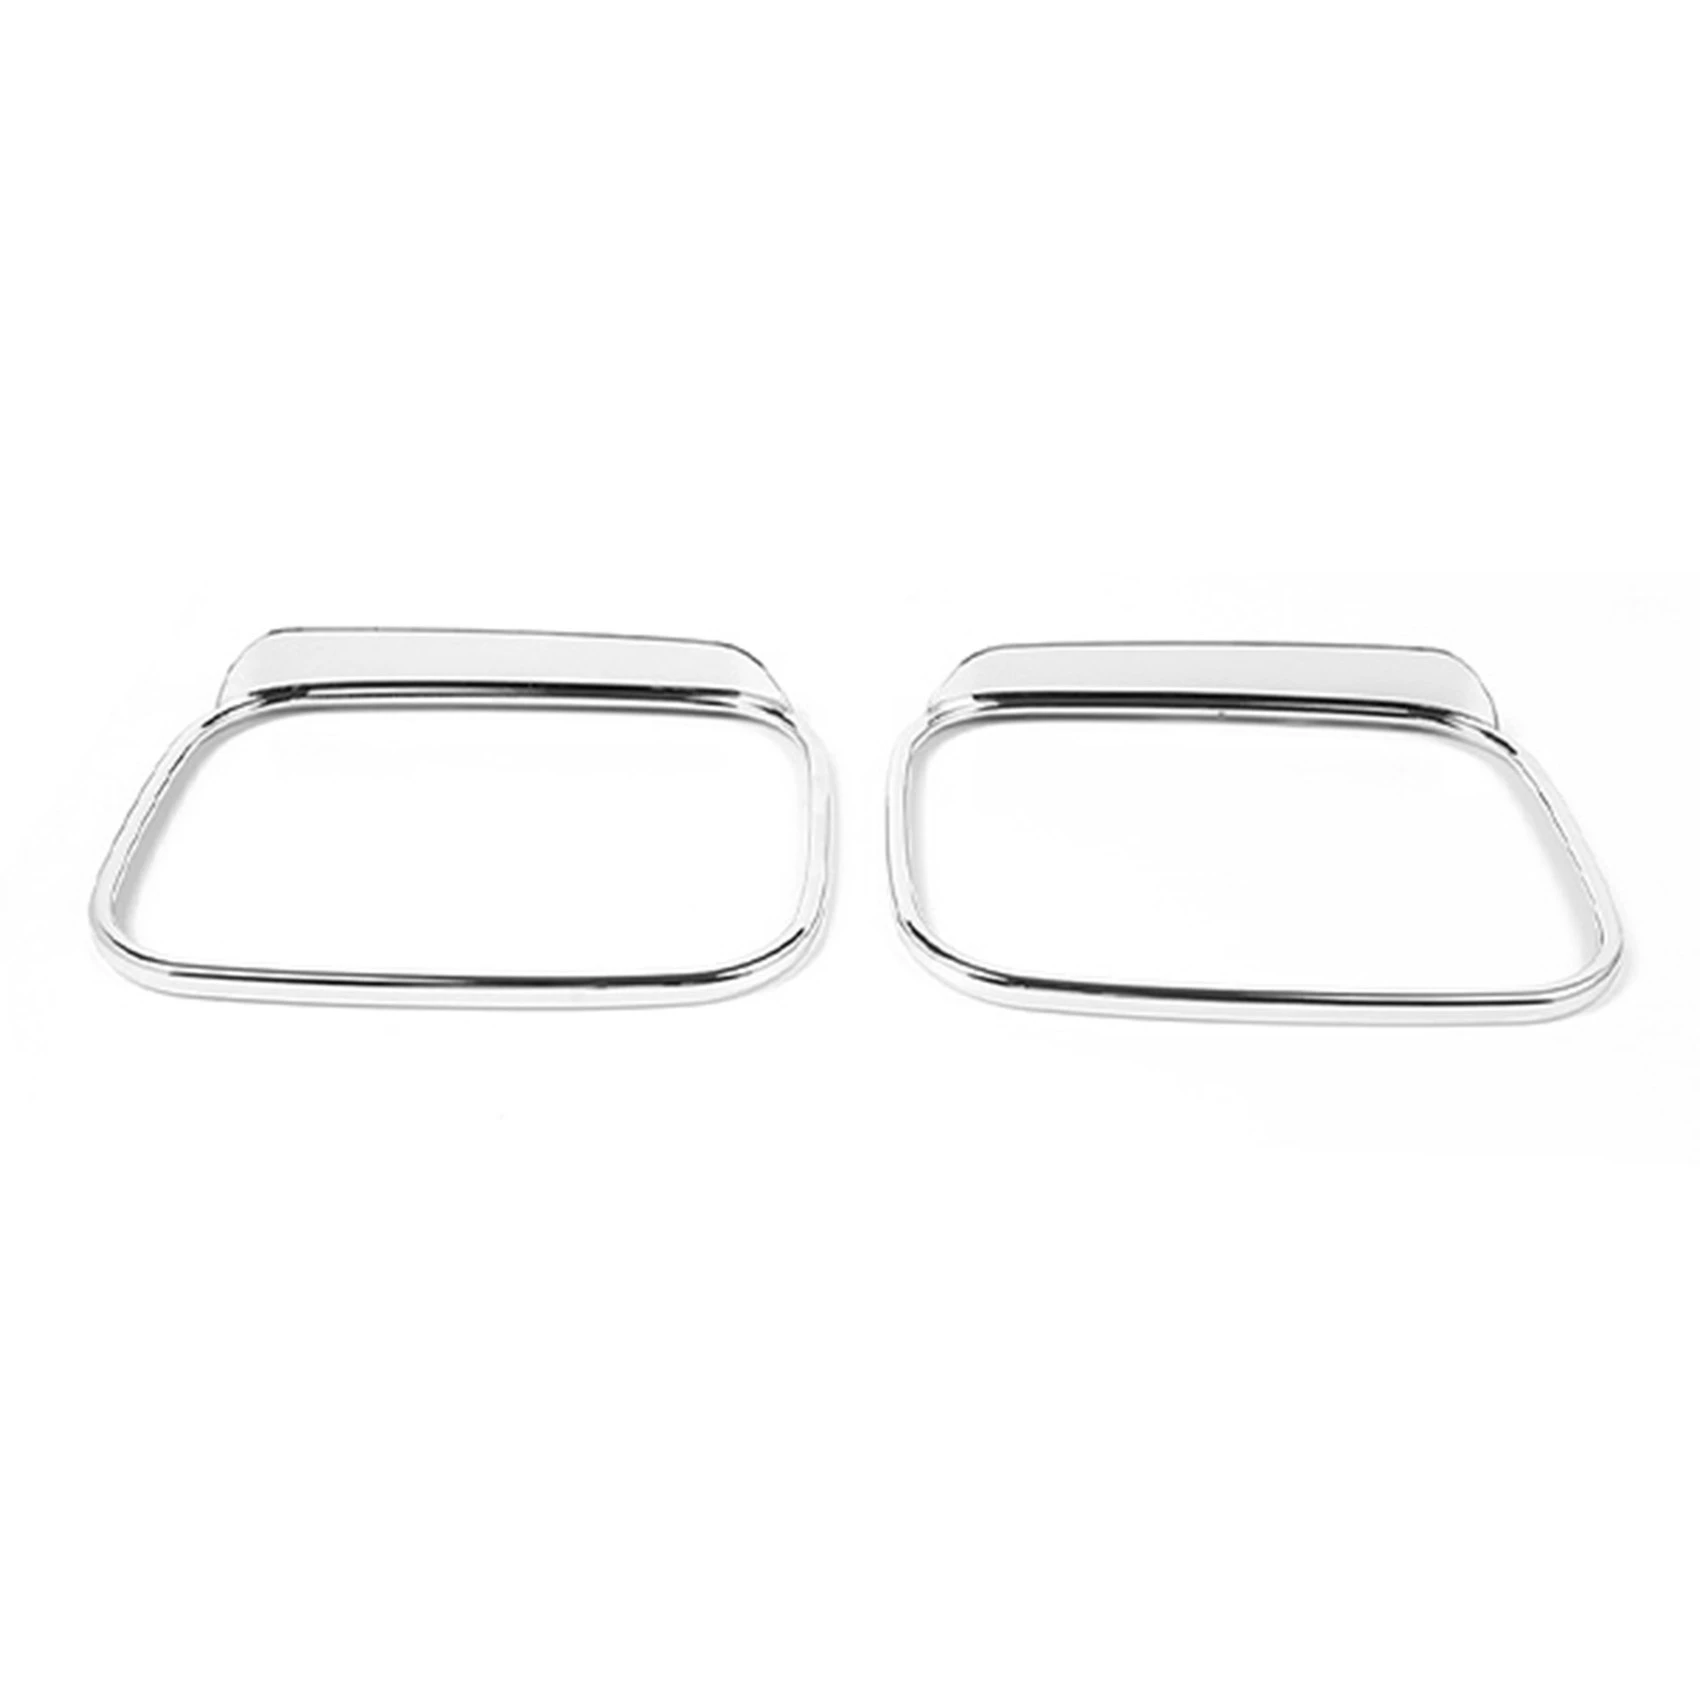 

2Pcs Car Decoration Rearview Mirror Covers Rain Eyebrow Frame Exterior for Hummer H2 2002-2005